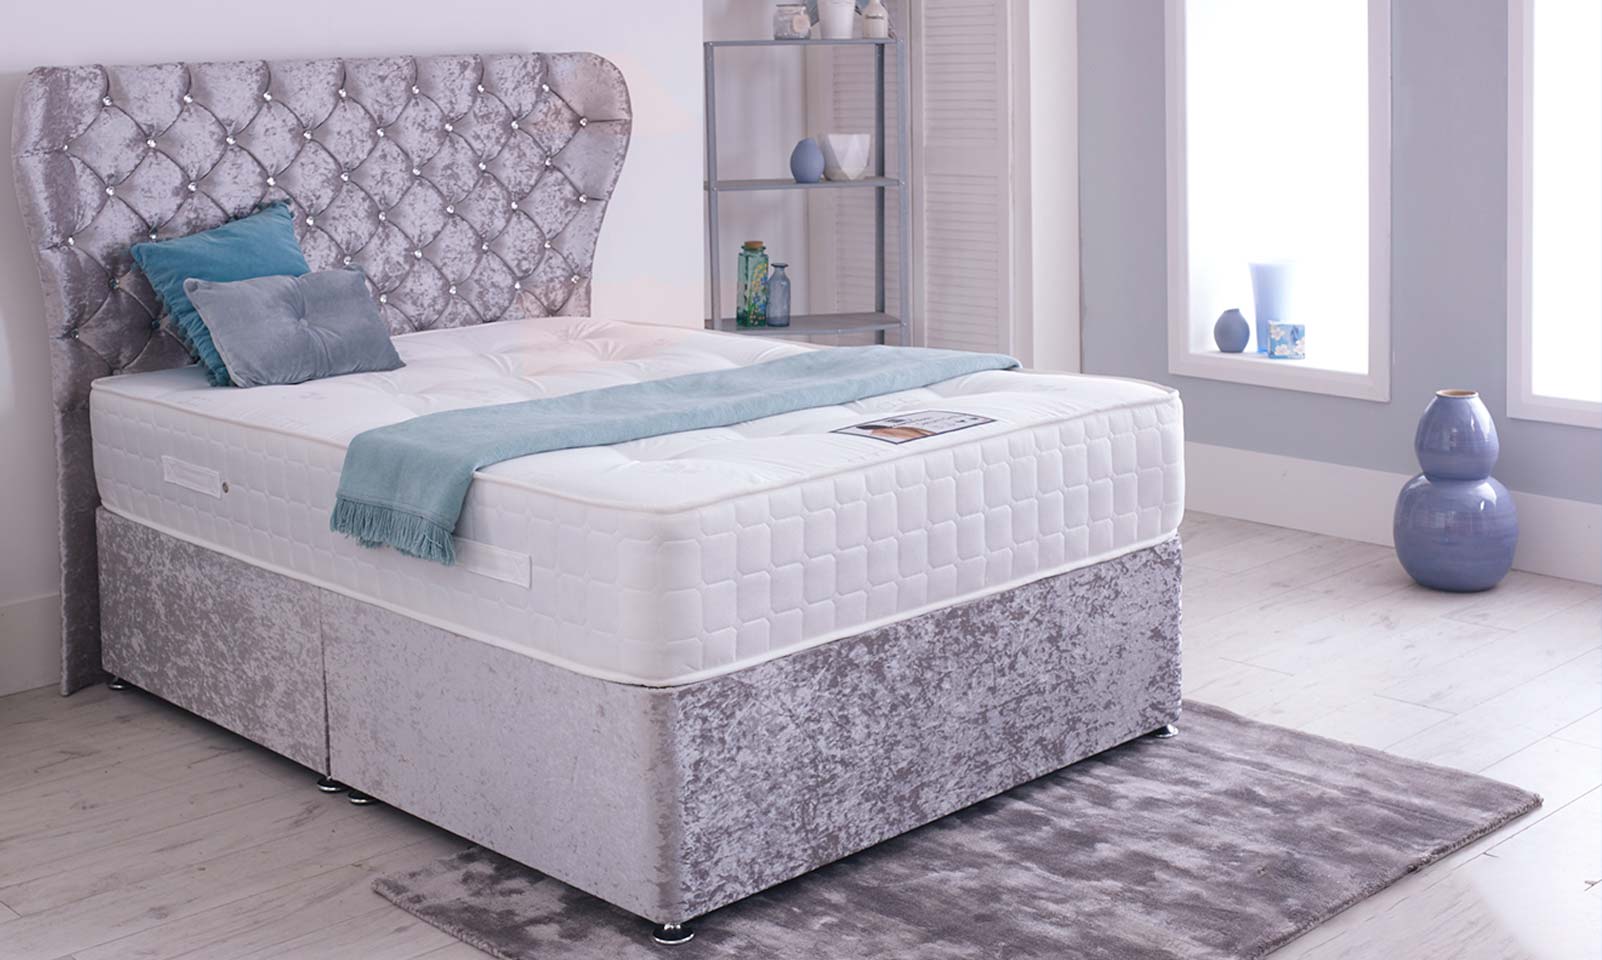 The Made to Measure Orthopaedic Divan Bed Baroness